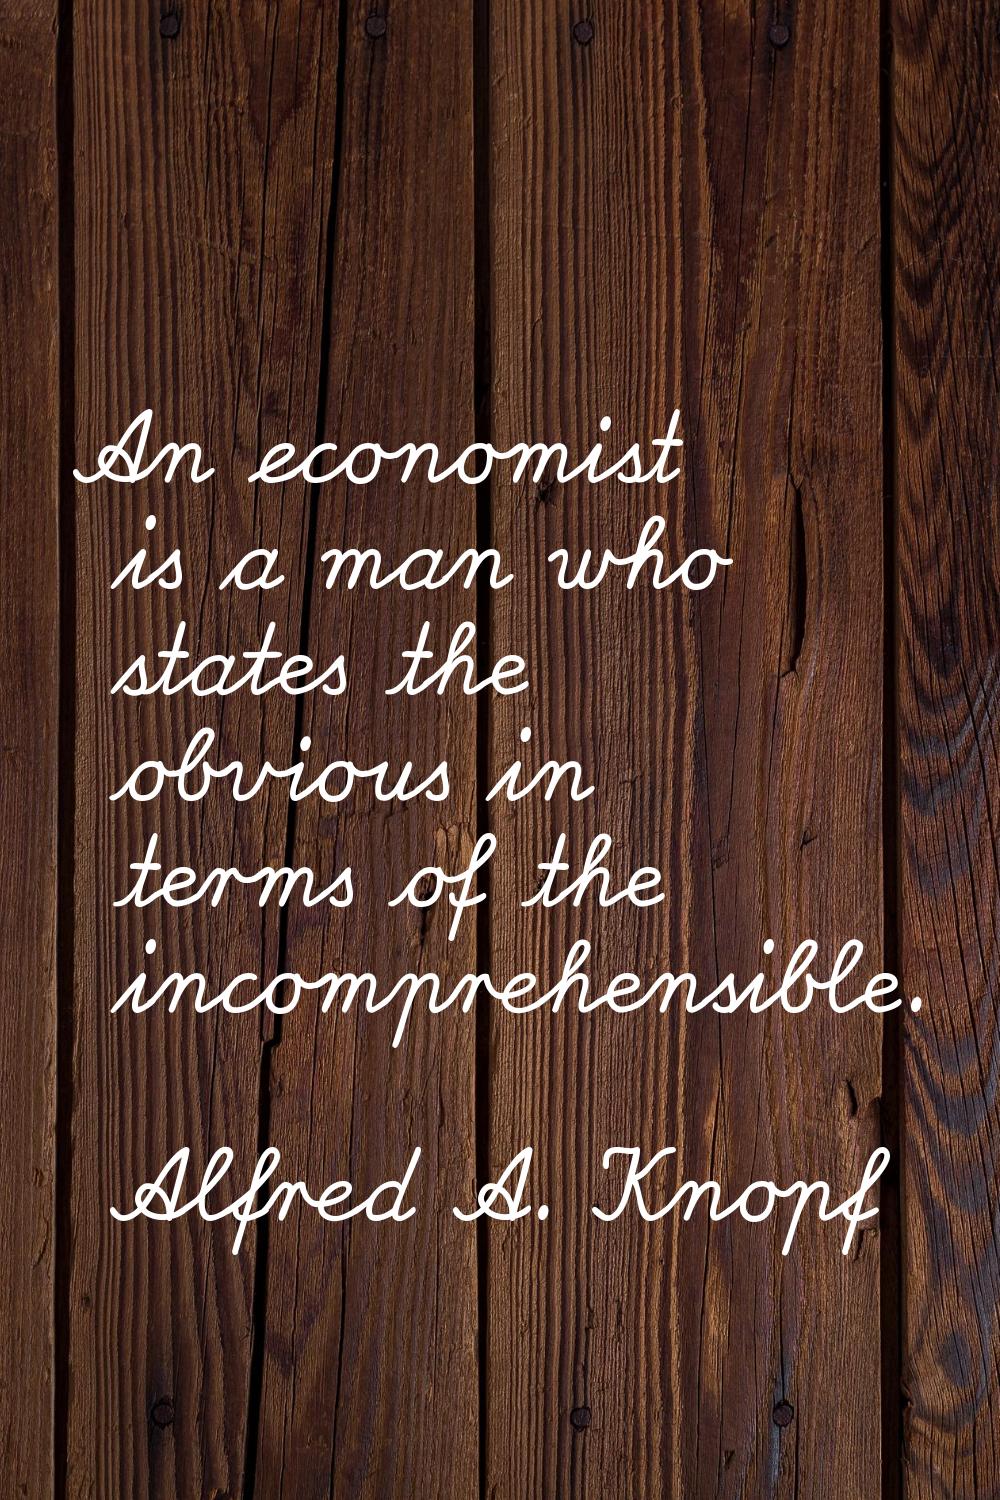 An economist is a man who states the obvious in terms of the incomprehensible.